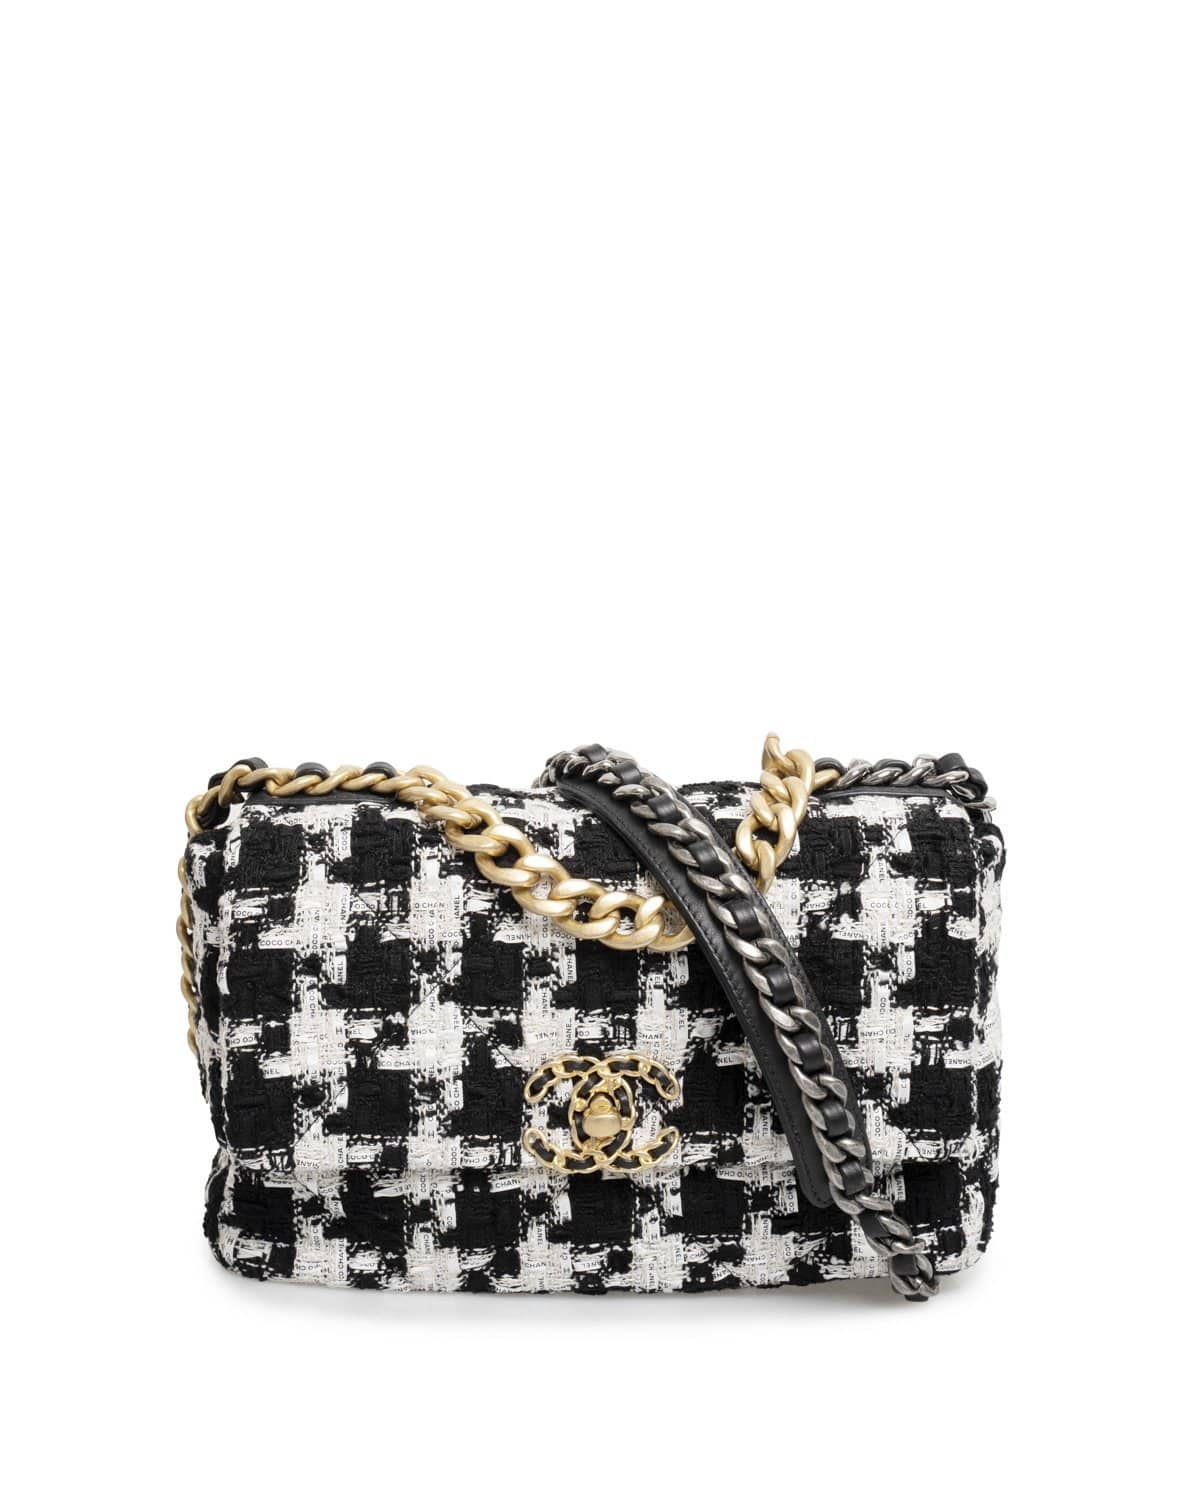 CHANEL Tweed Houndstooth Mini Square Flap Black White 1240469